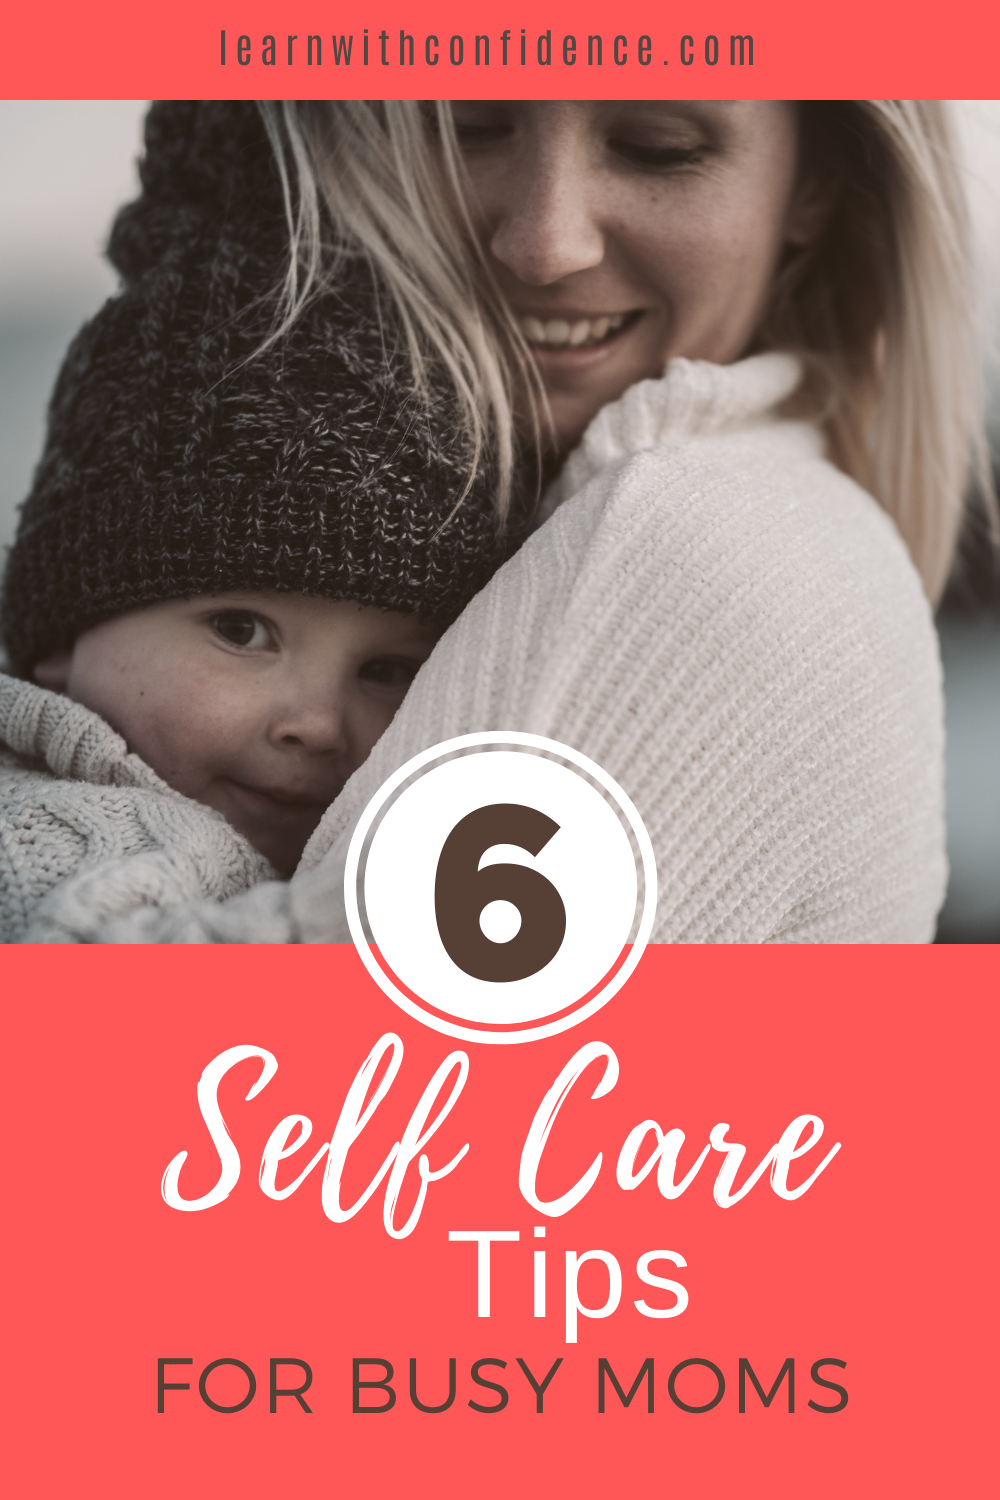 How to make Self Care a Priority for Busy Moms.